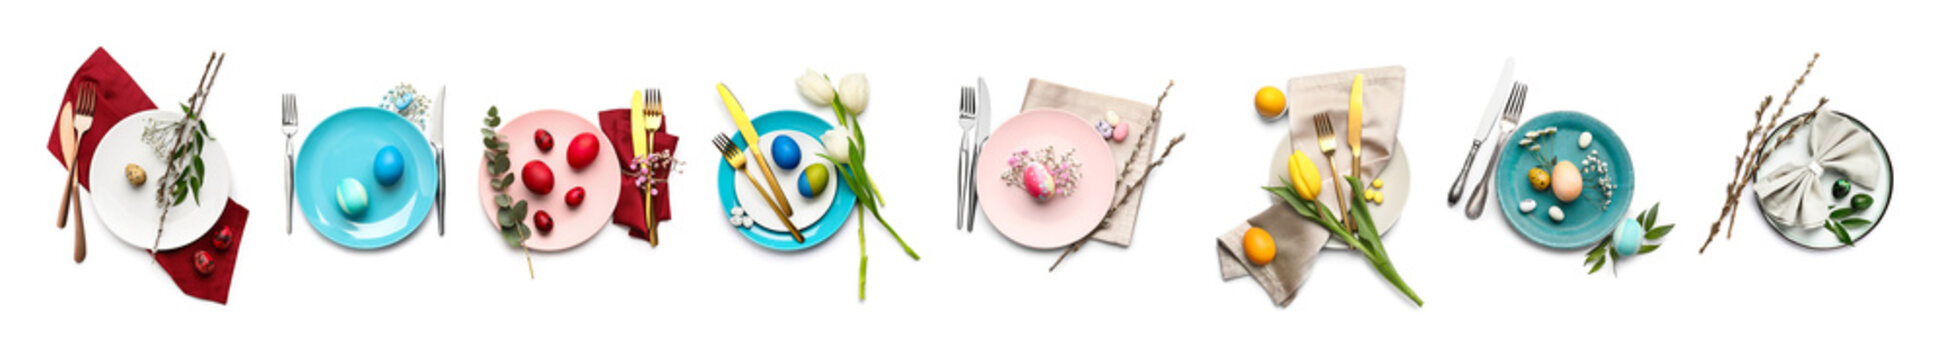 Collection of stylish table settings for Easter celebration on white background